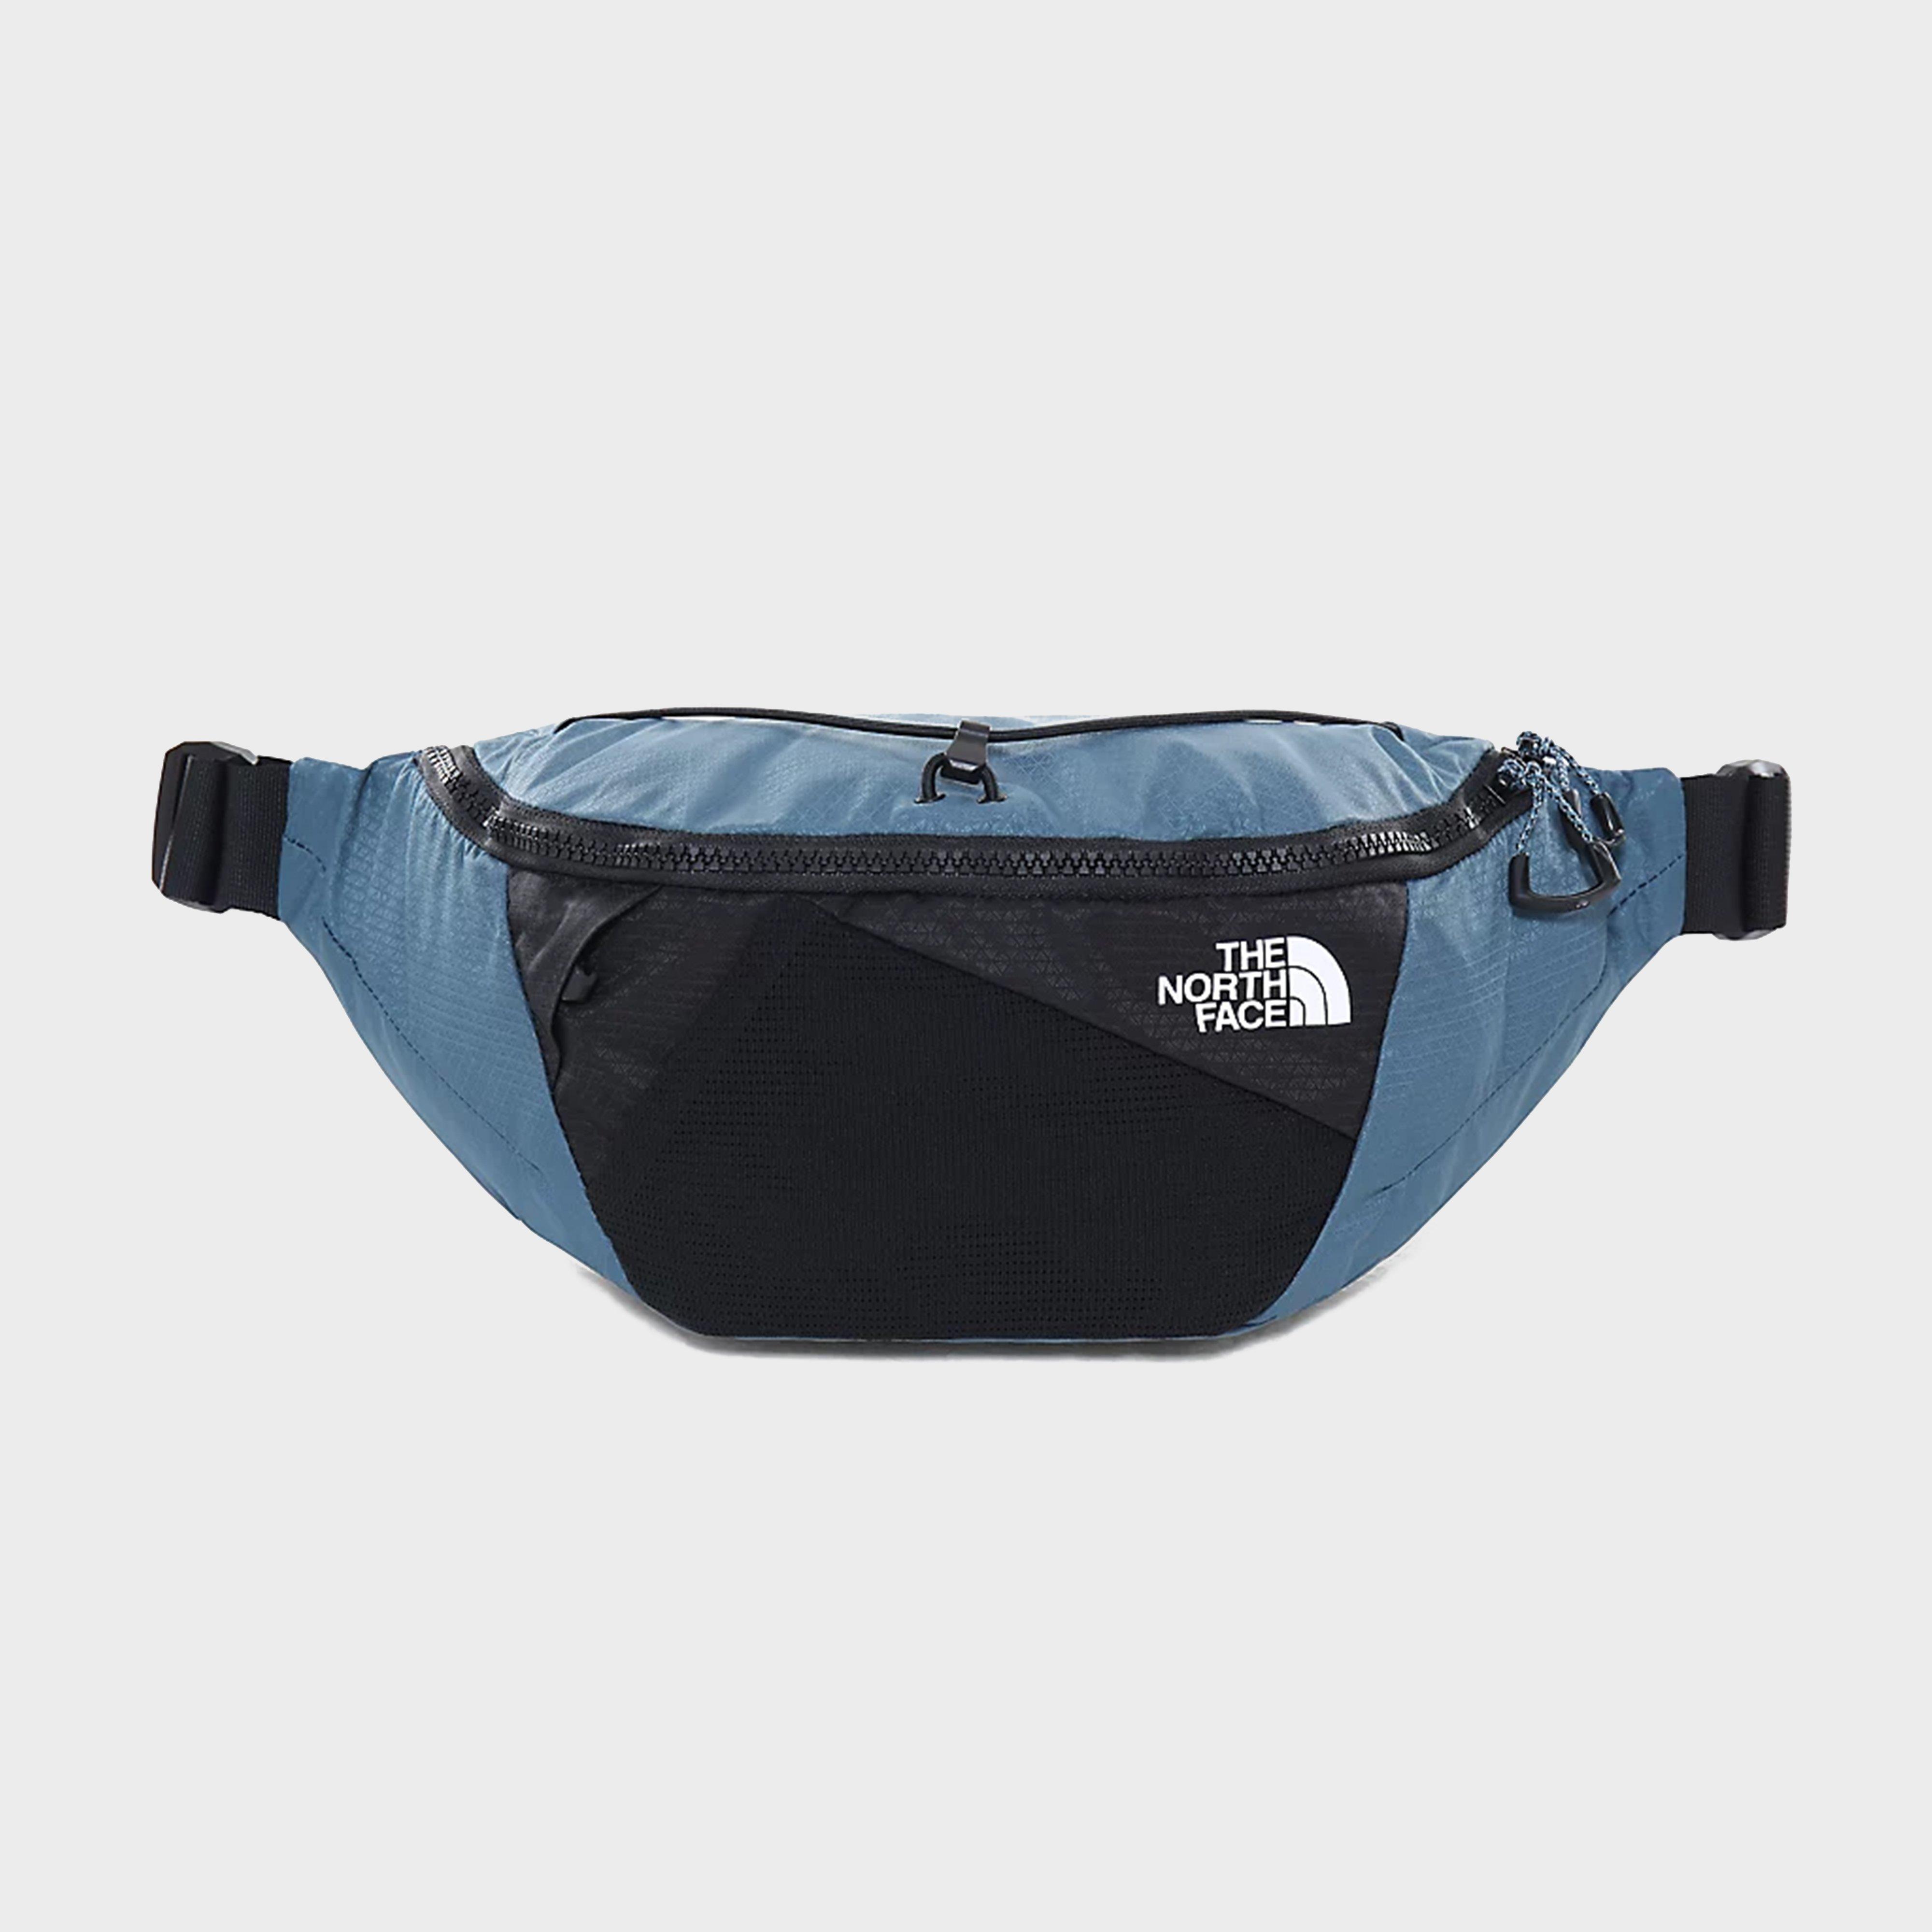 The North Face Lumbnical Bum Bag (Small 